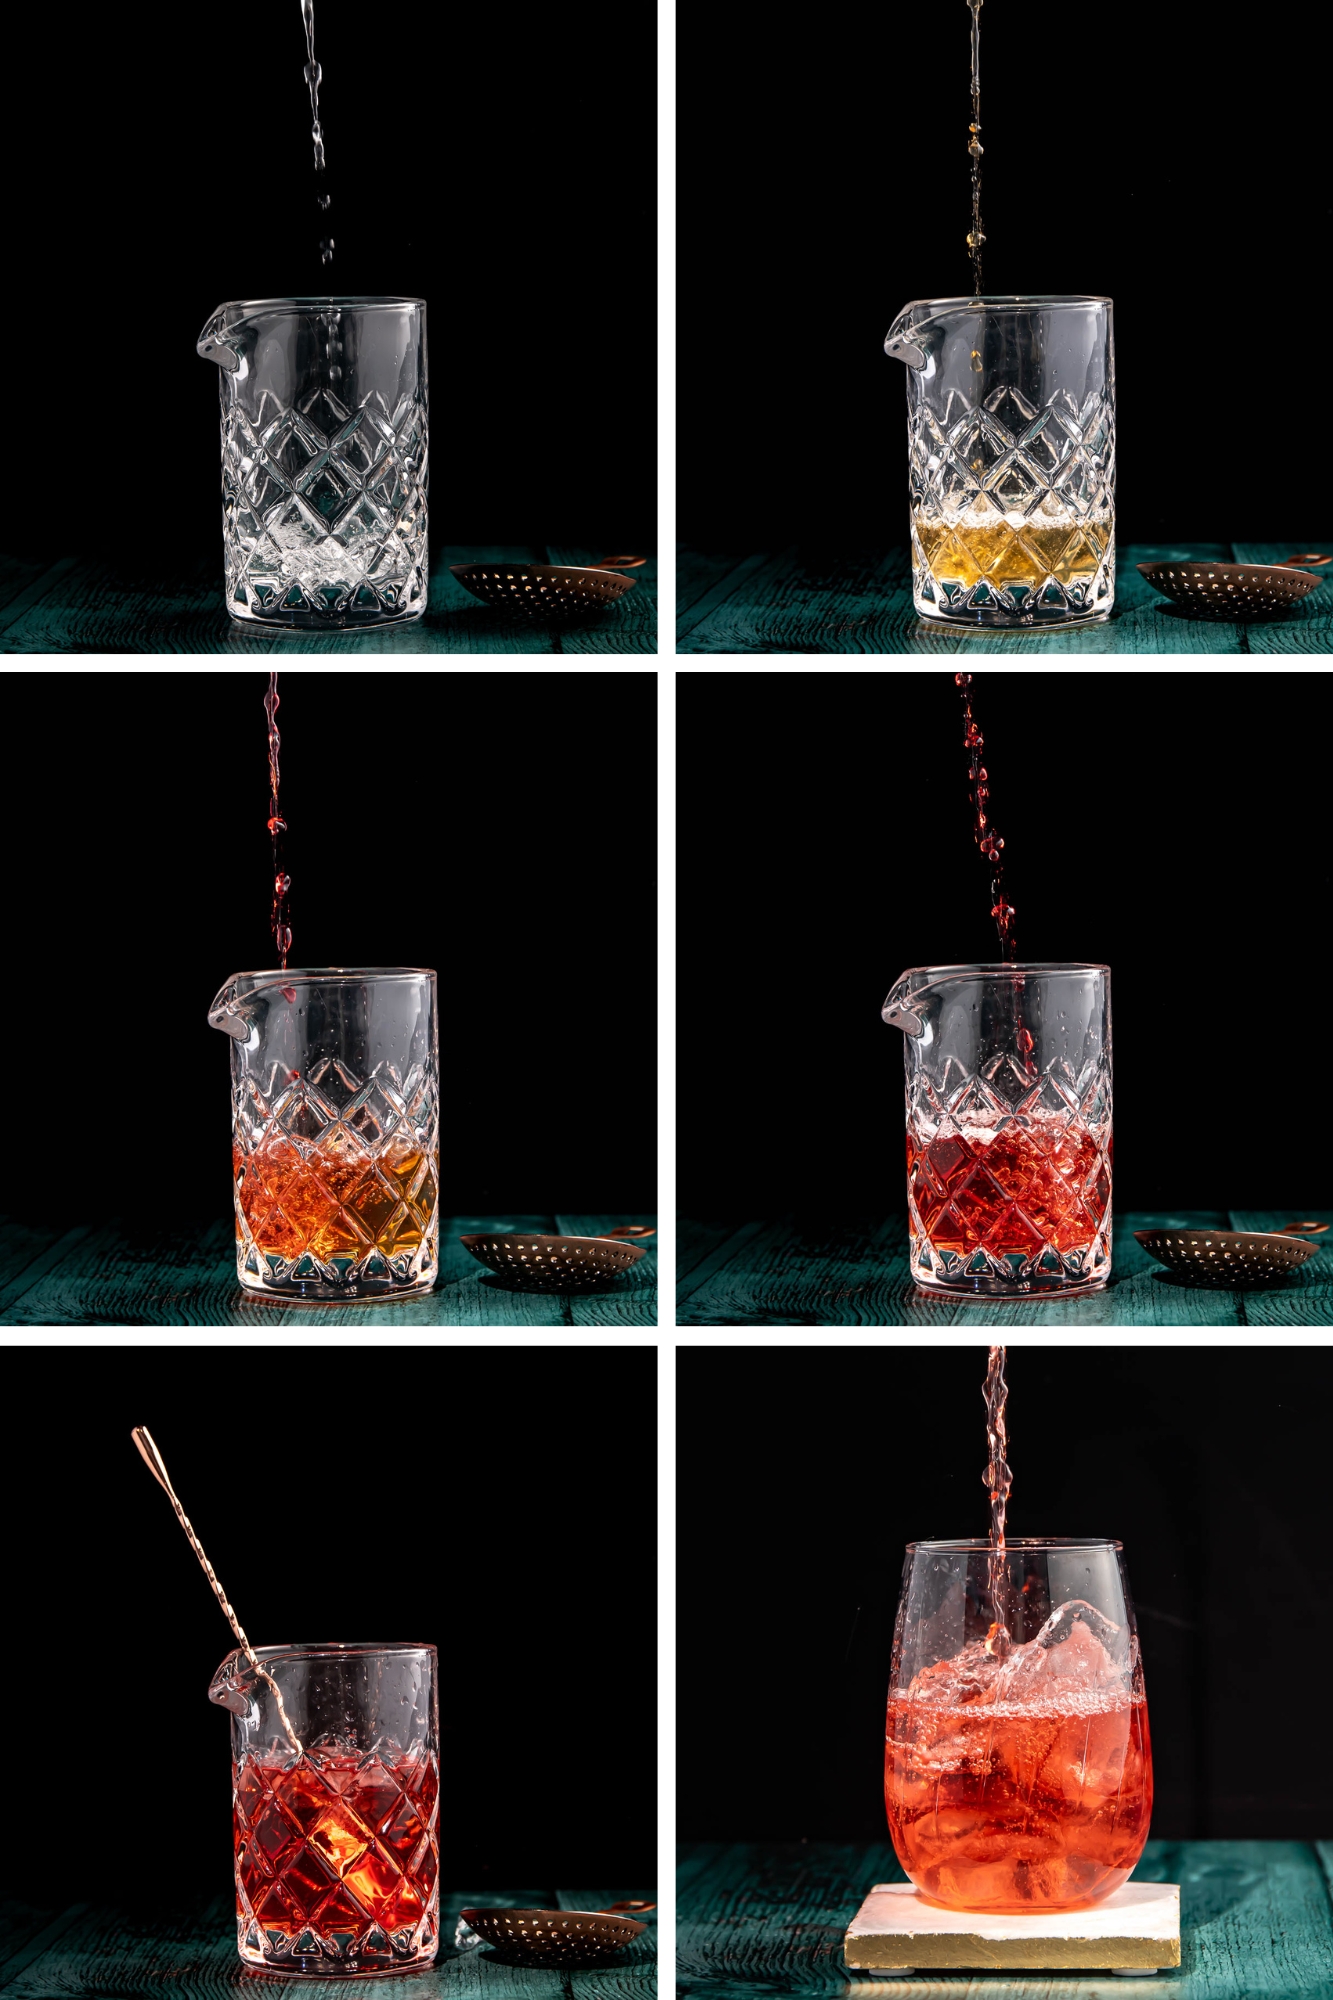 Process images for making a non alcoholic negroni